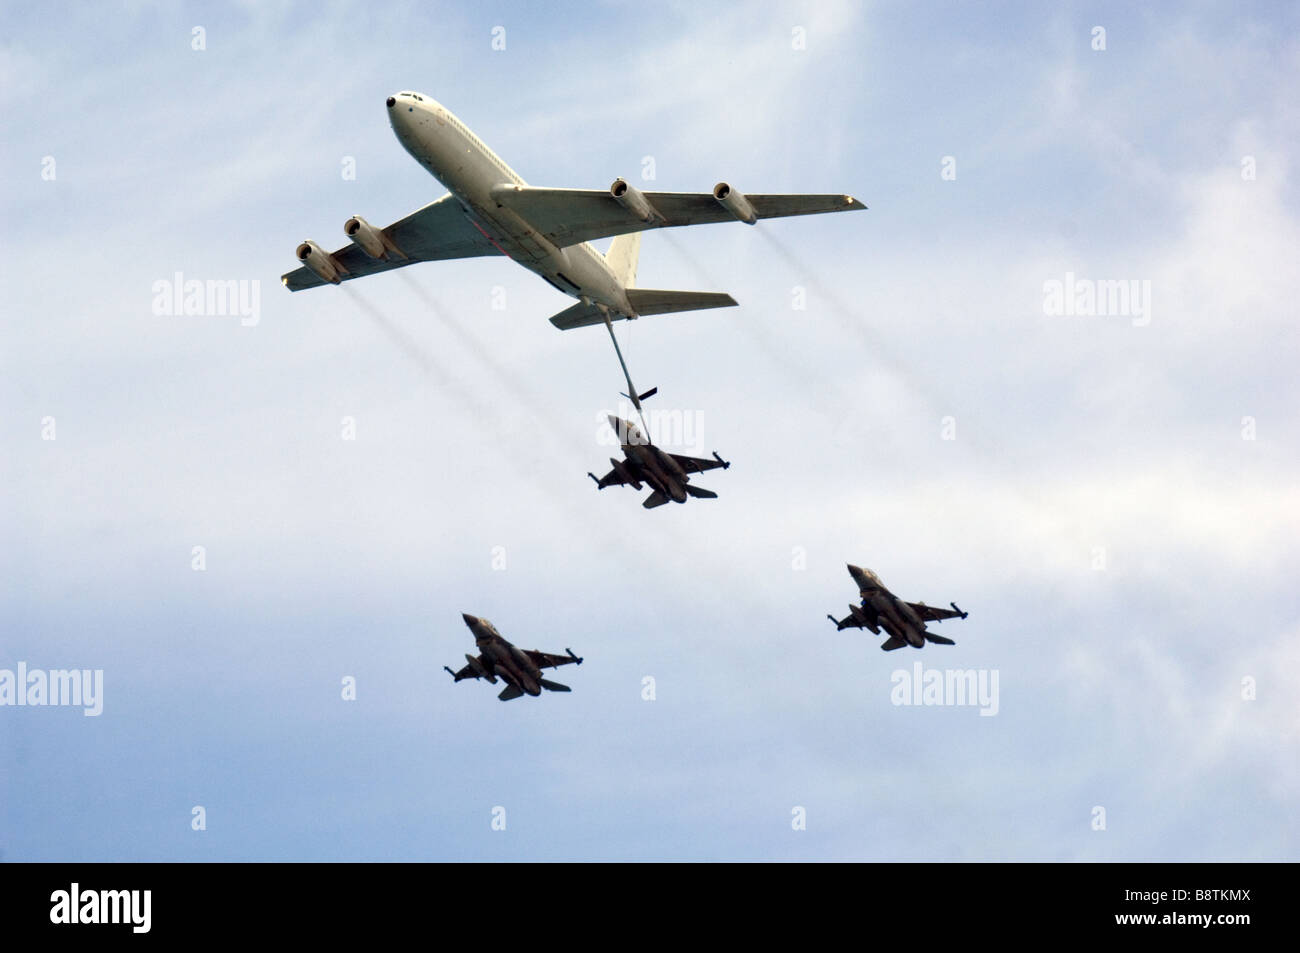 Four fighter jets refueling in mid air Israeli Airforce air show Independence day Stock Photo